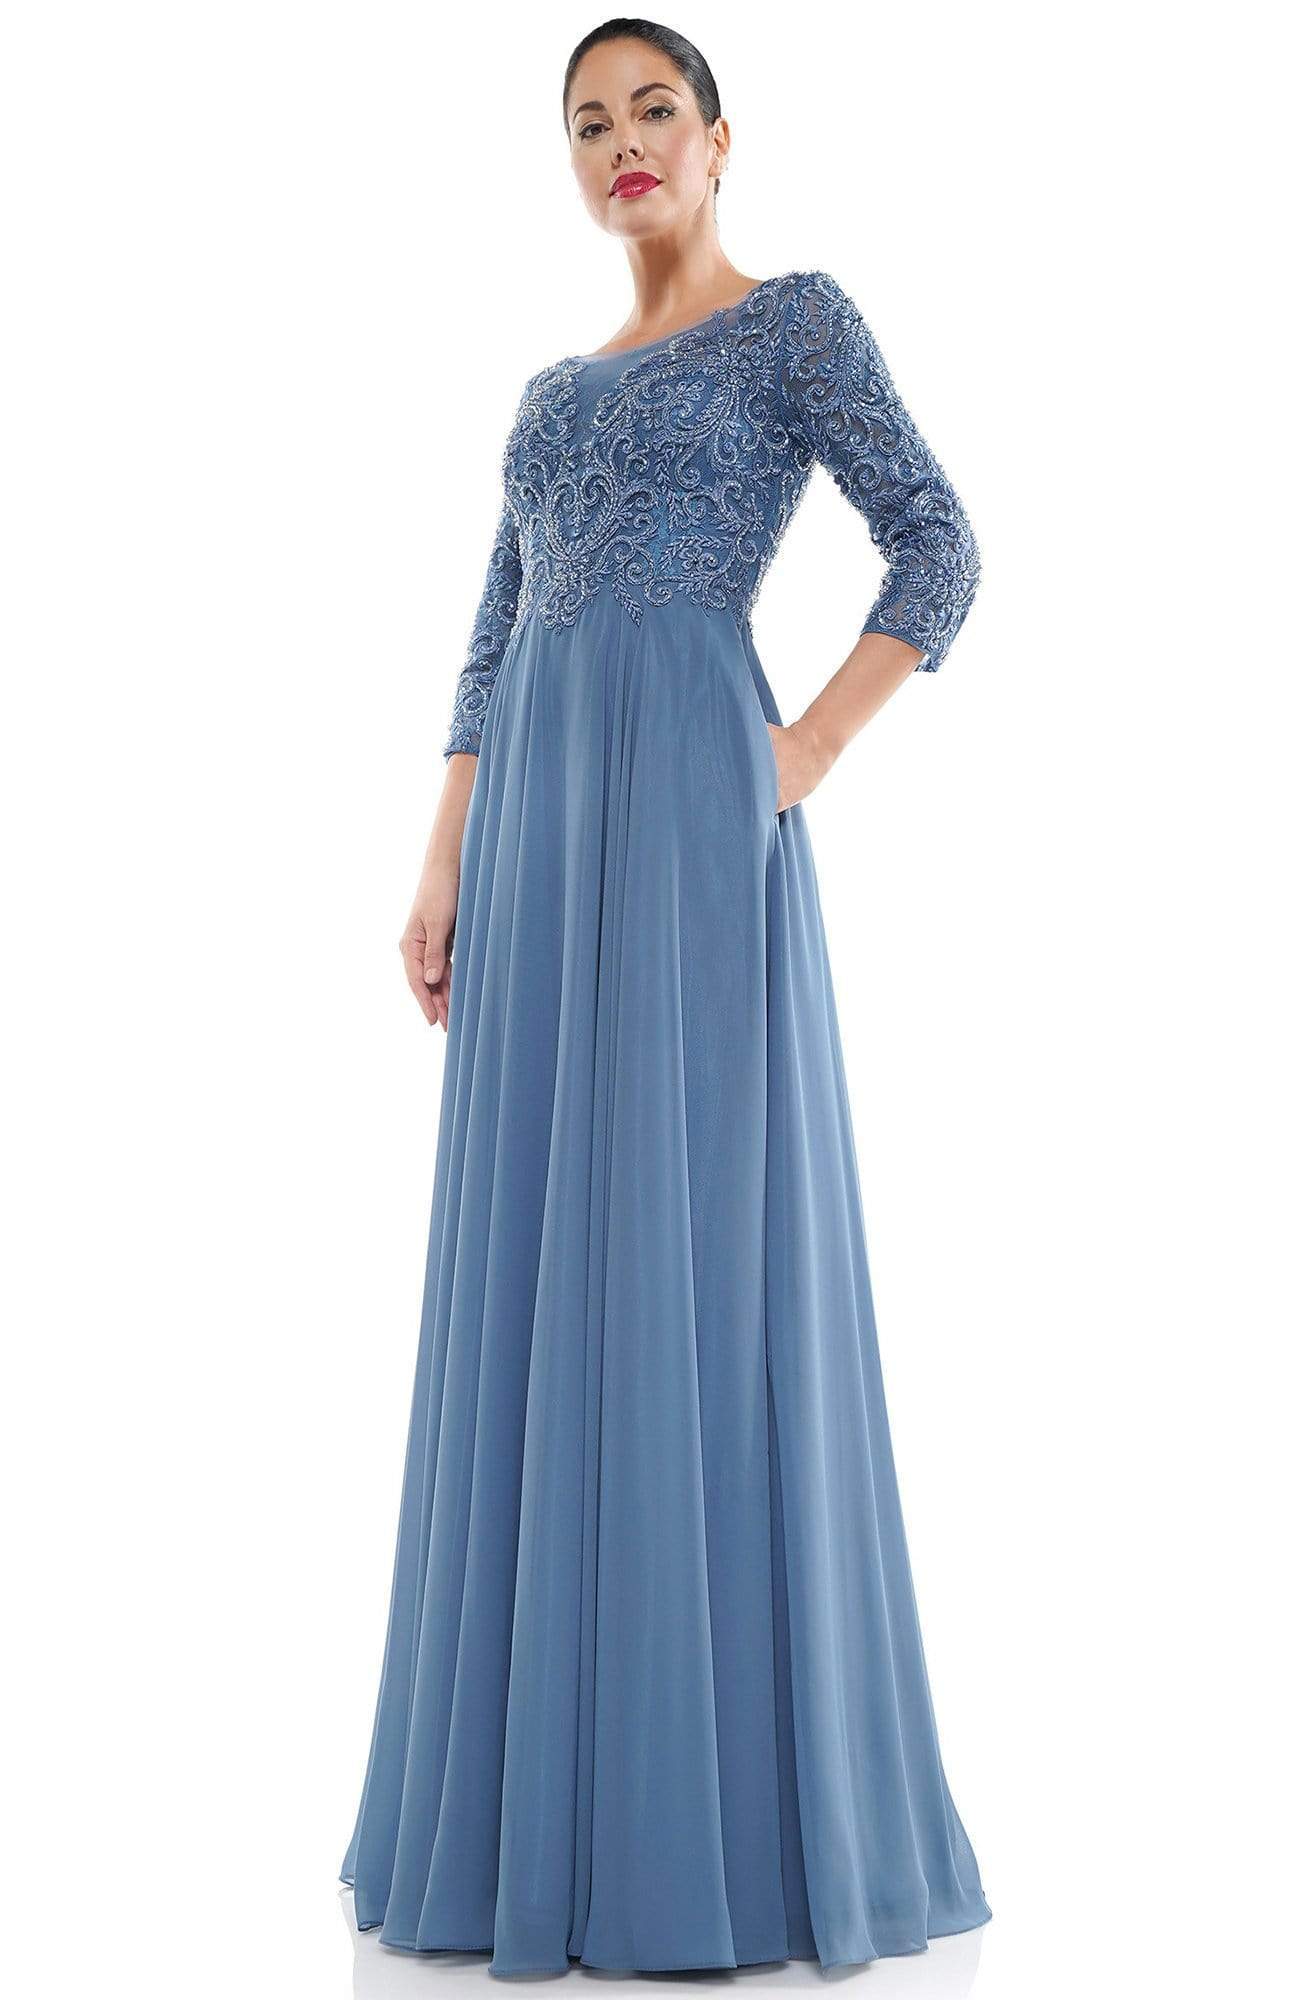 Marsoni by Colors - MV1052 Embroidered Bateau Chiffon A-line Gown Mother of the Bride Dresses